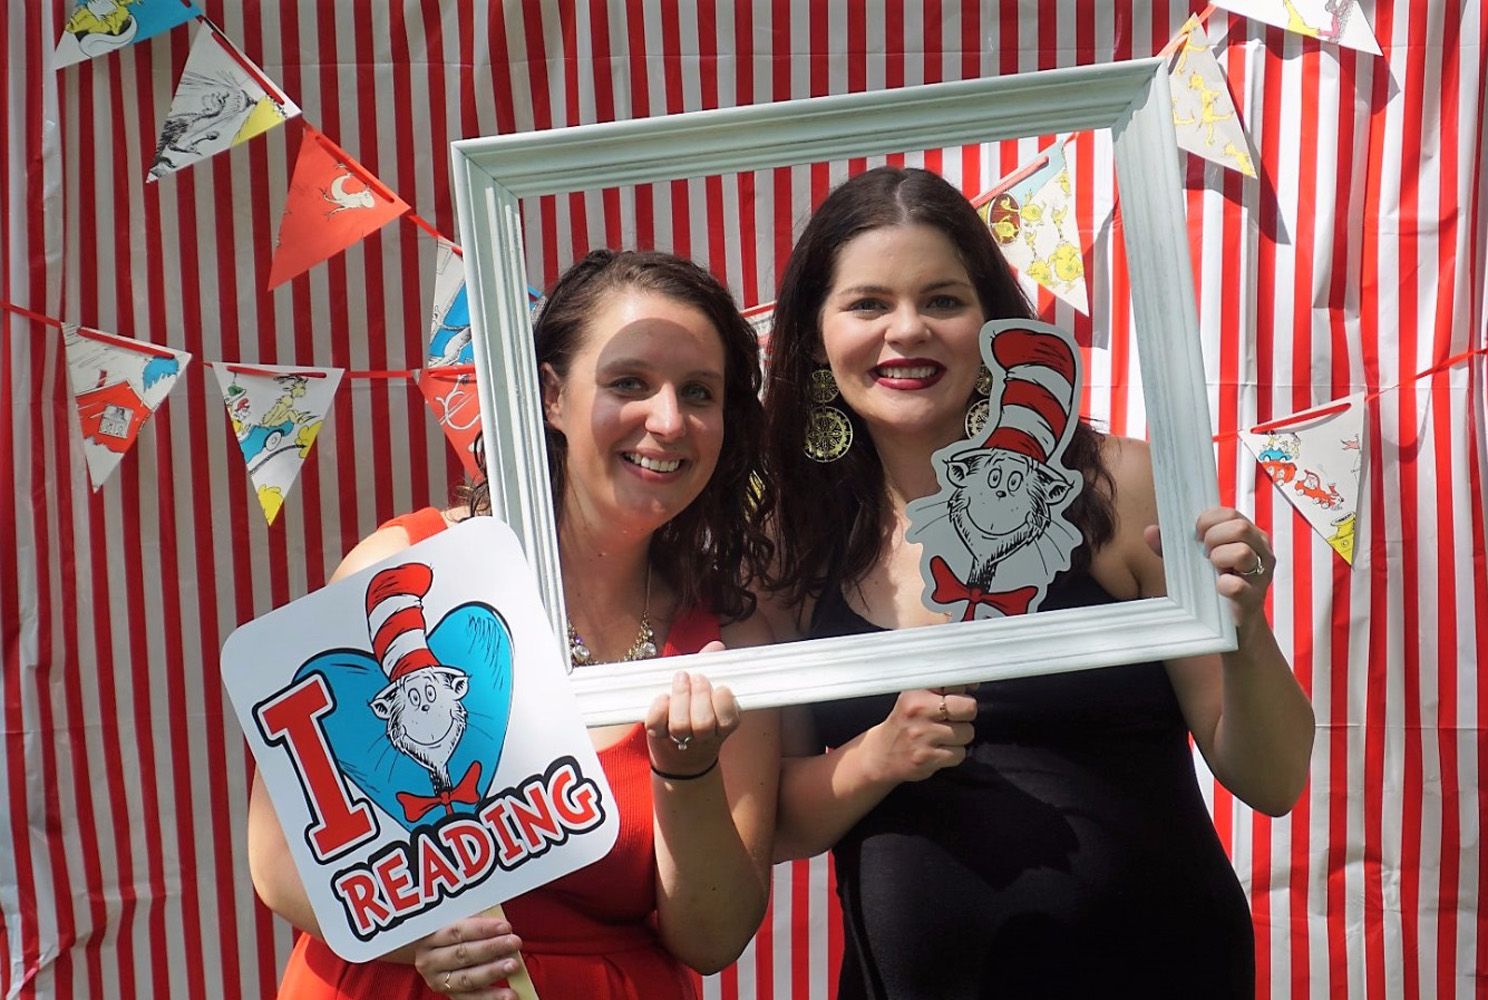  Dr. Seuss photo booth 